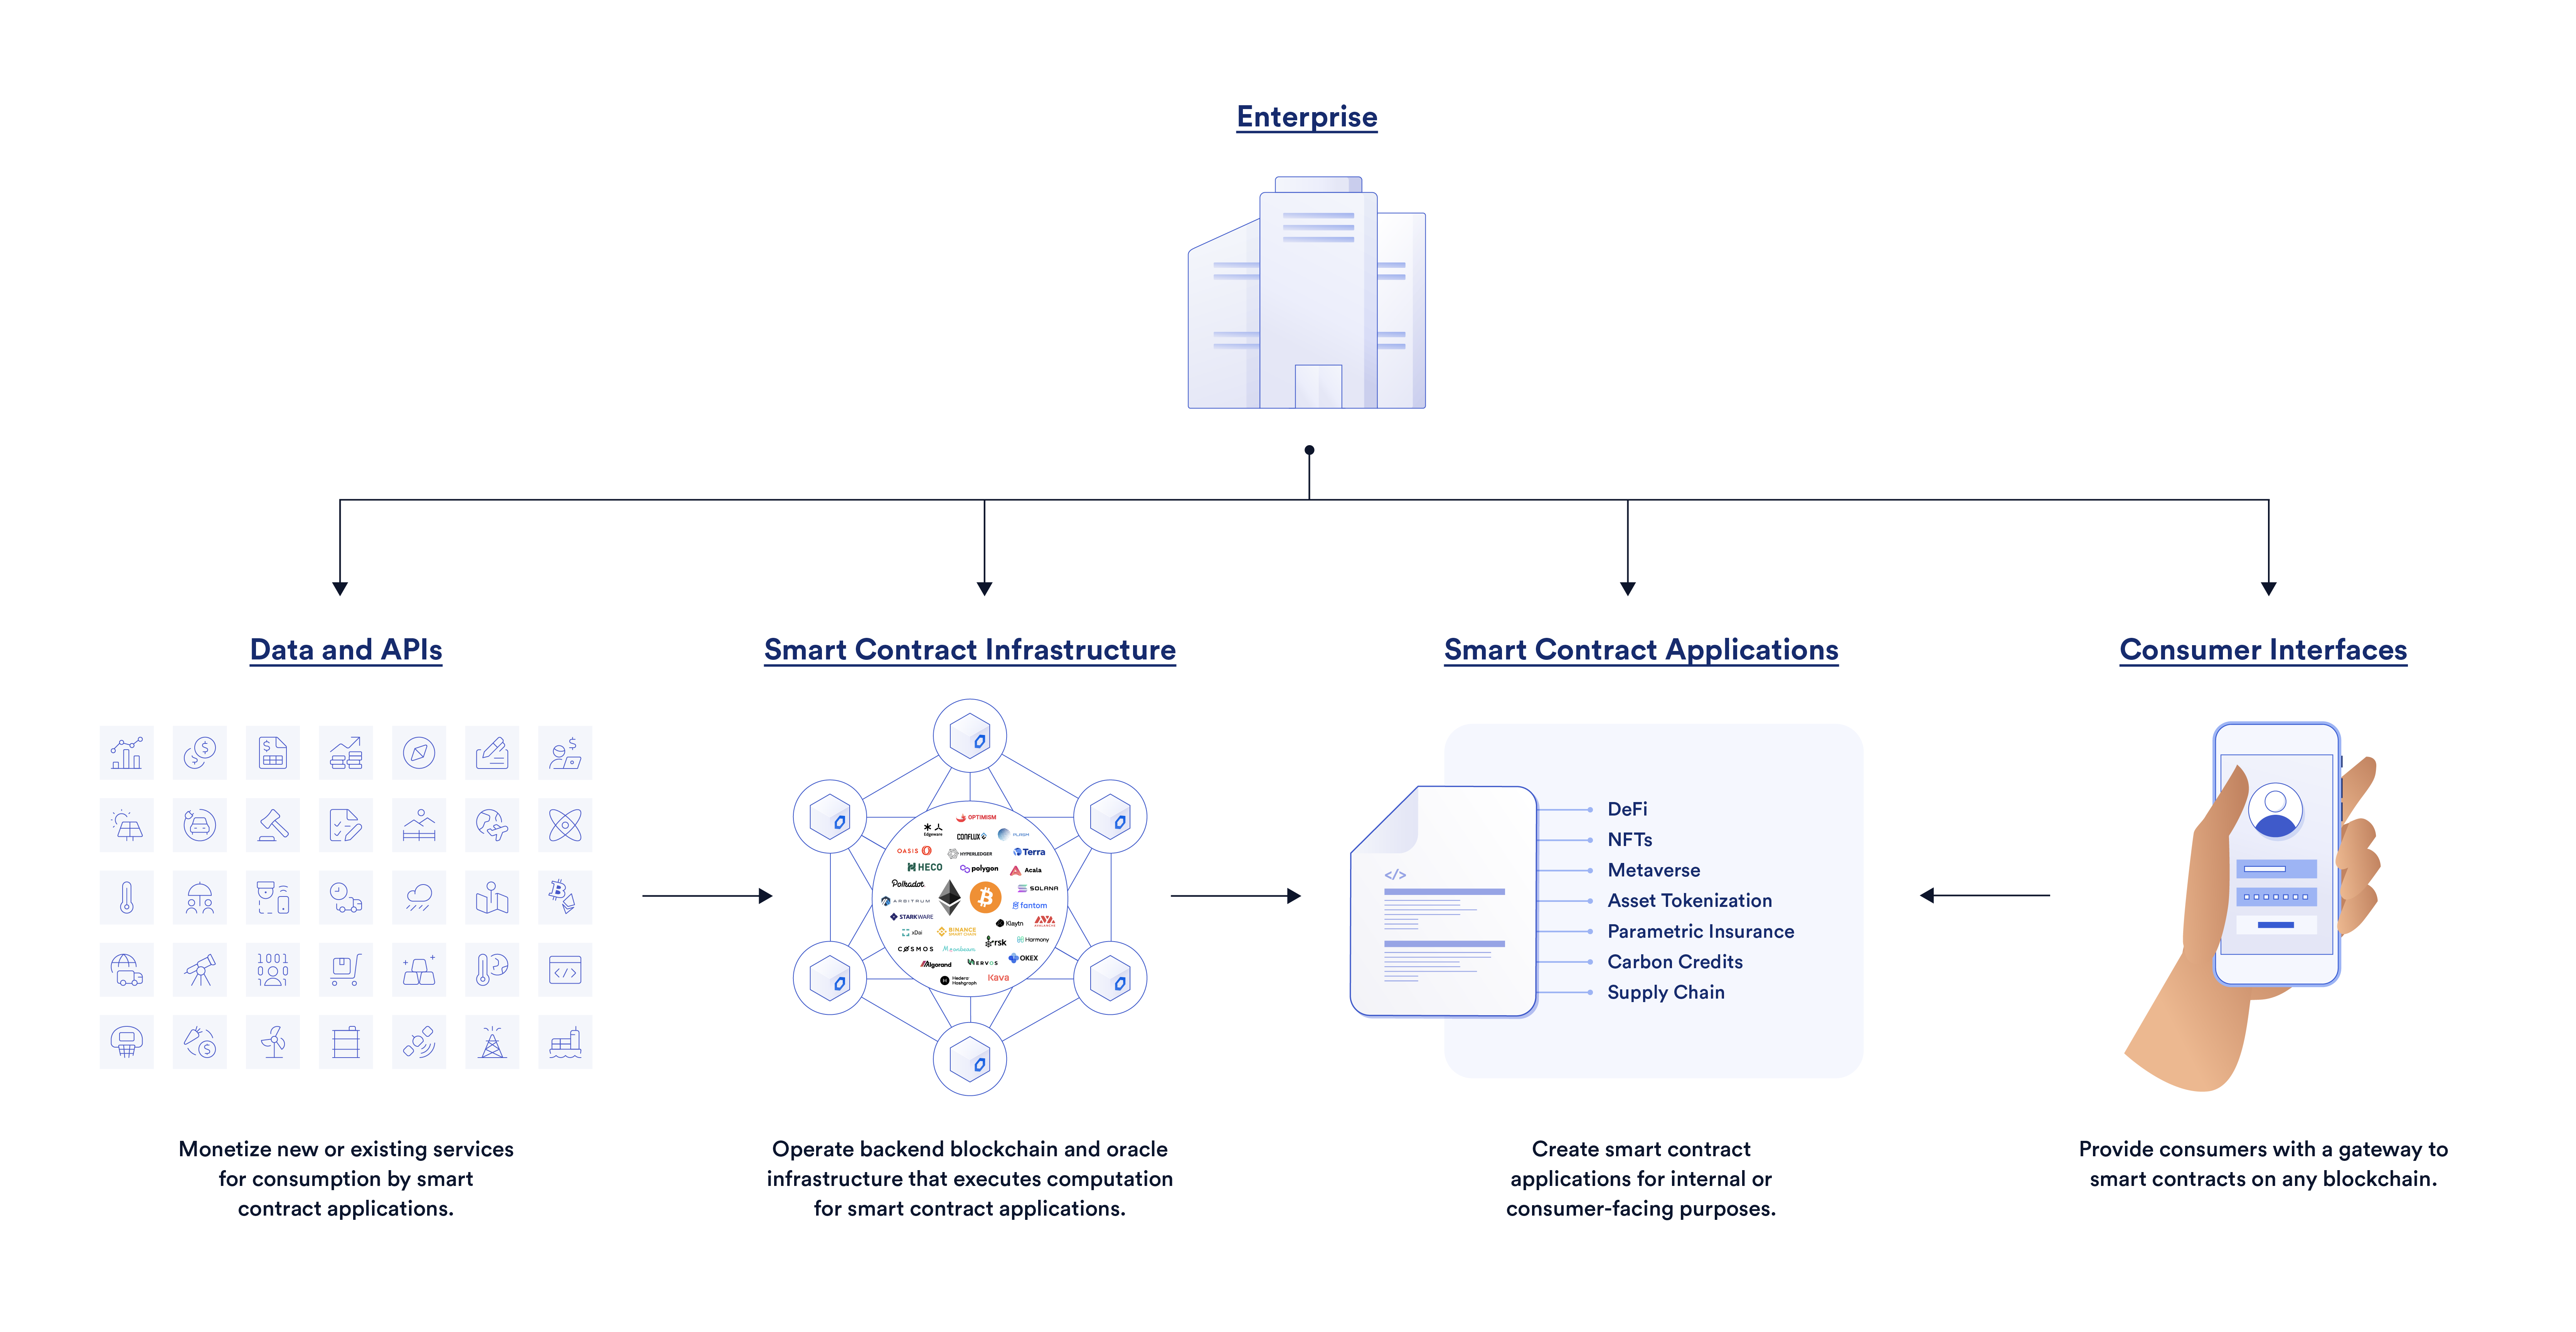 Enterprise support for smart contracts